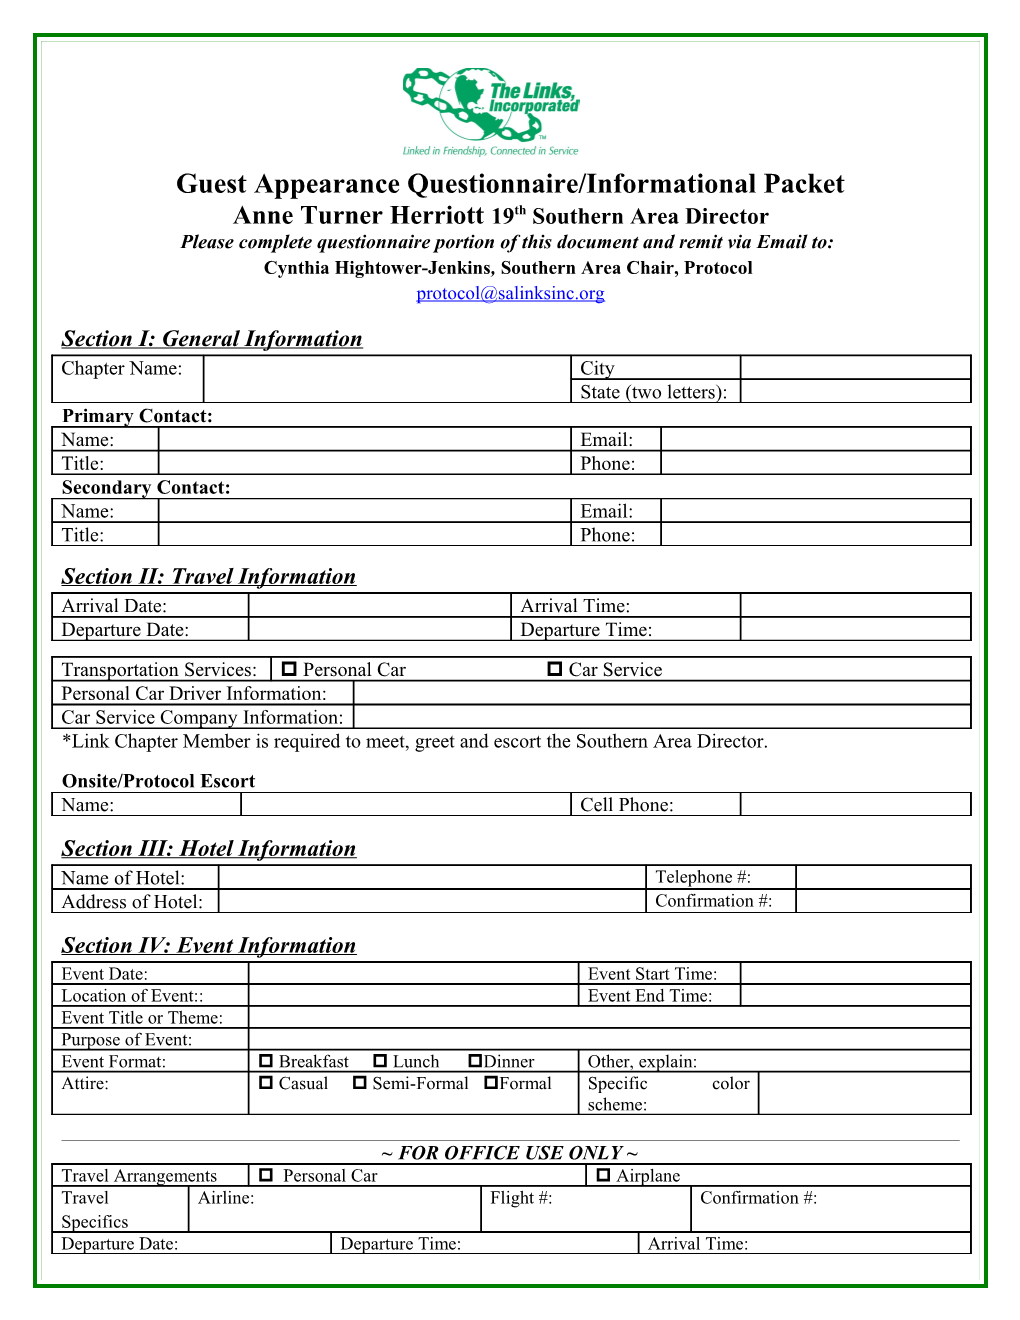 Guest Appearance Questionnaire/Informational Packet